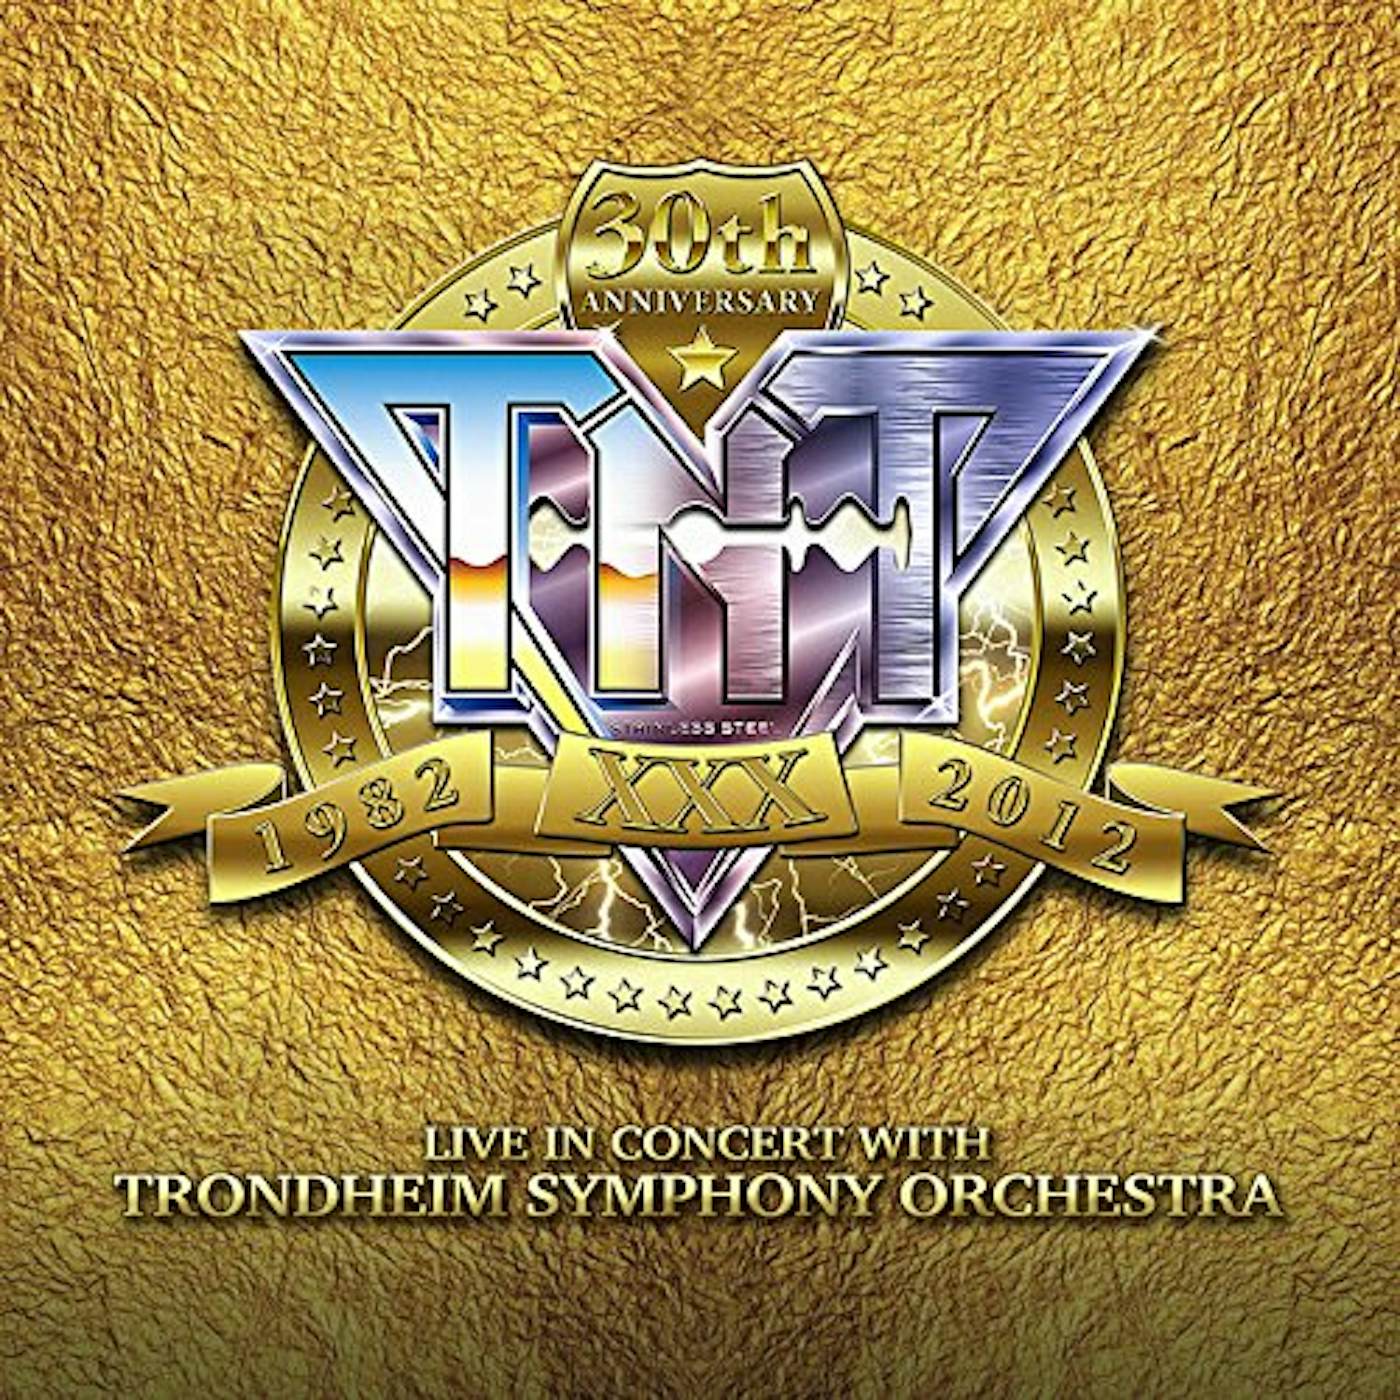 TNT 30TH ANNIVERSARY 1982-2012 LIVE IN CONCERT CD